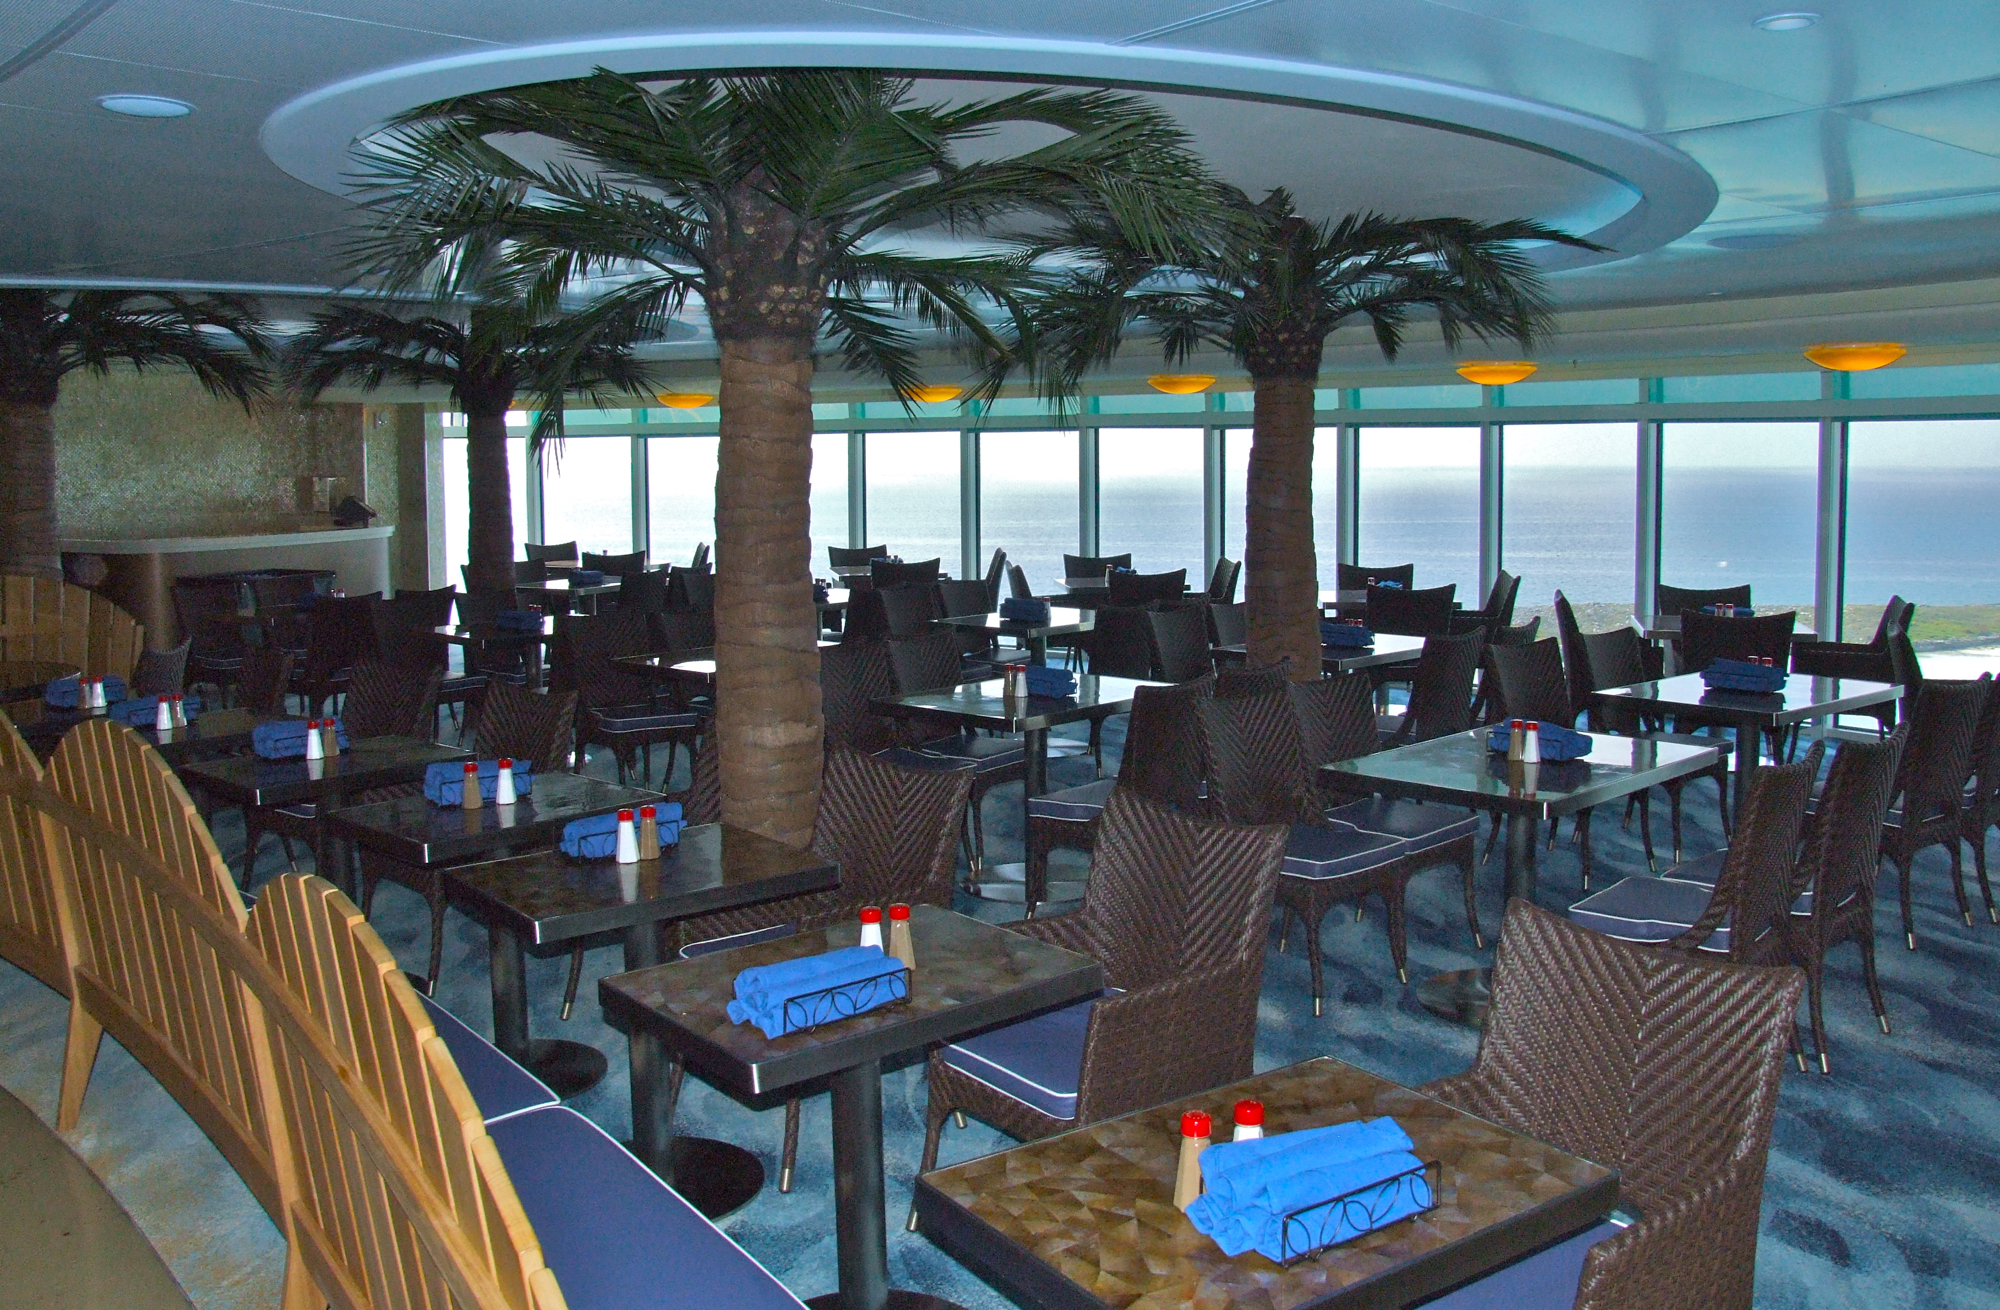 Seating Area at Cabanas on the Disney Dream